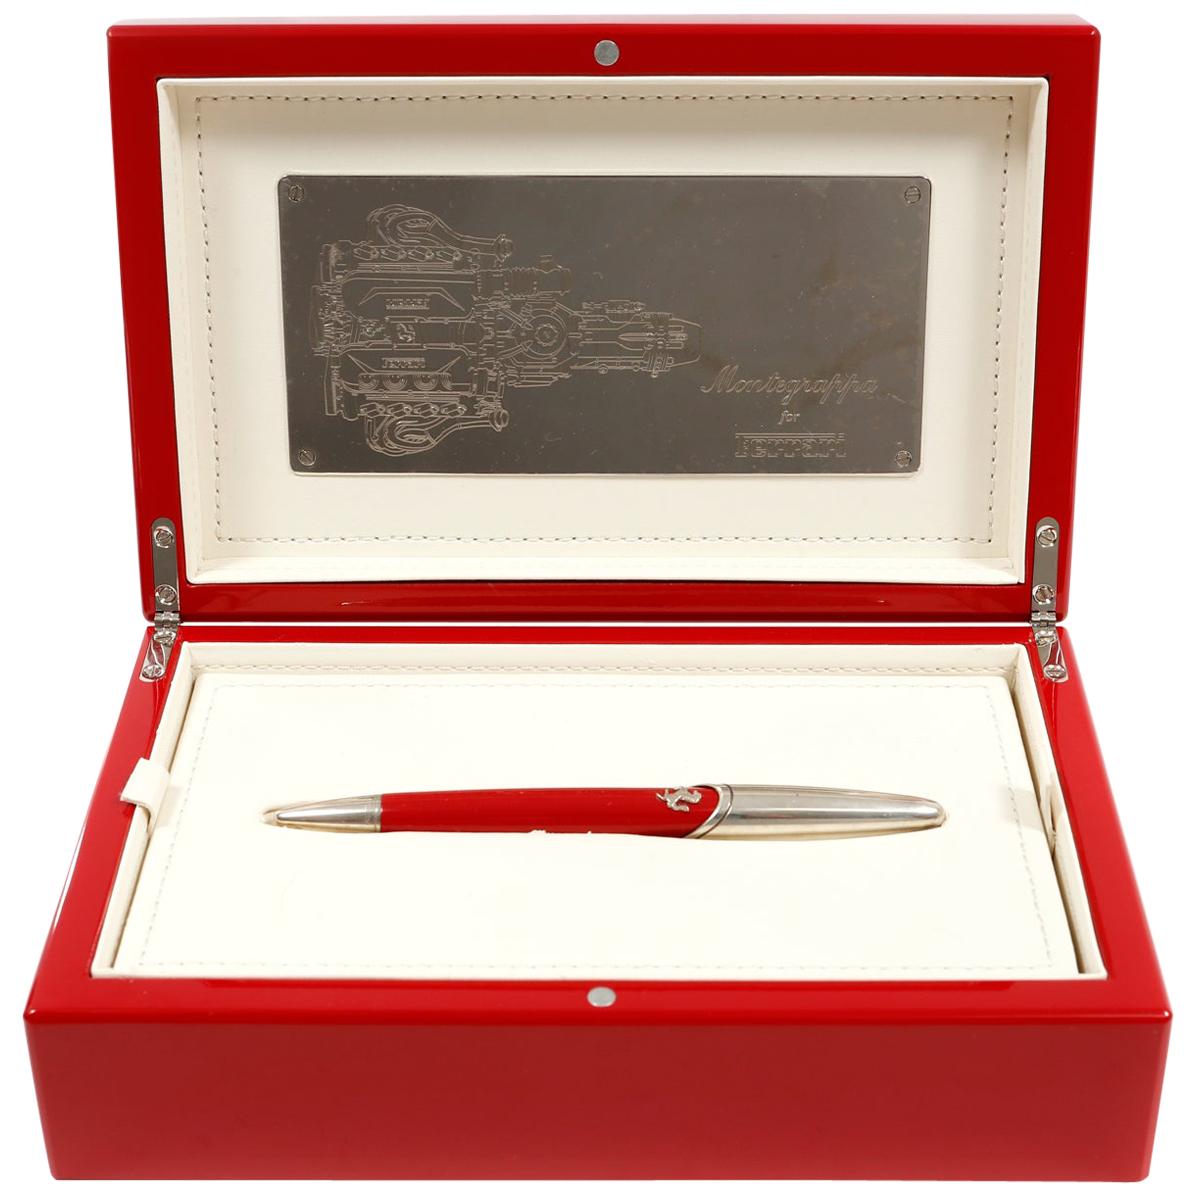 Montegrappa for Ferrari Limited Edition Silver with Red Pen